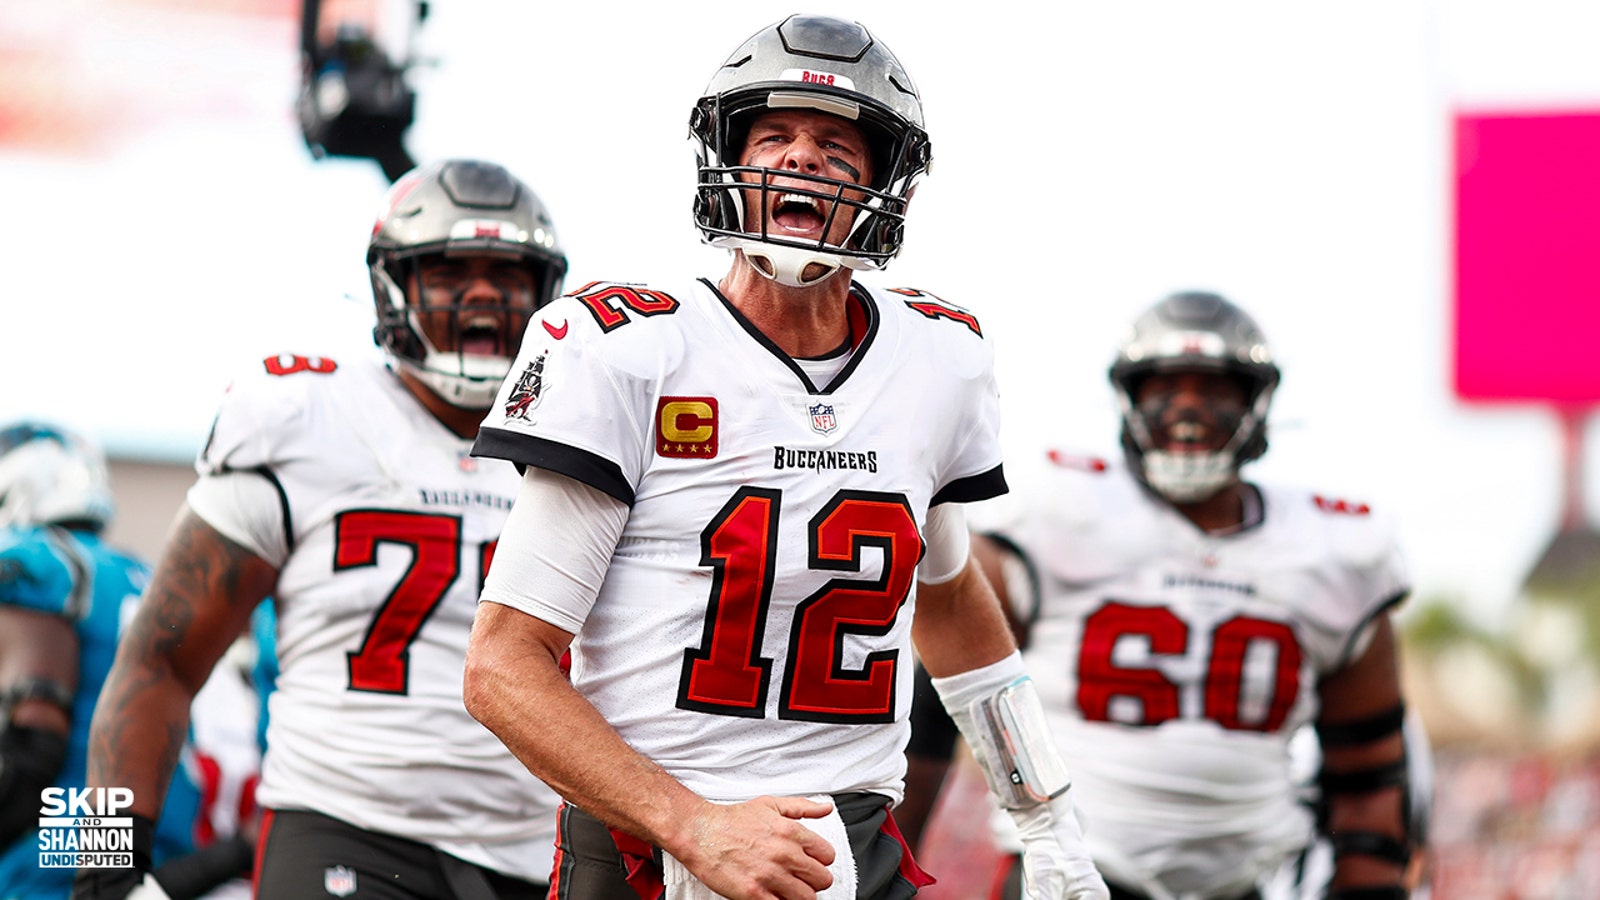 Buccaneers clinch NFC South with win over Panthers